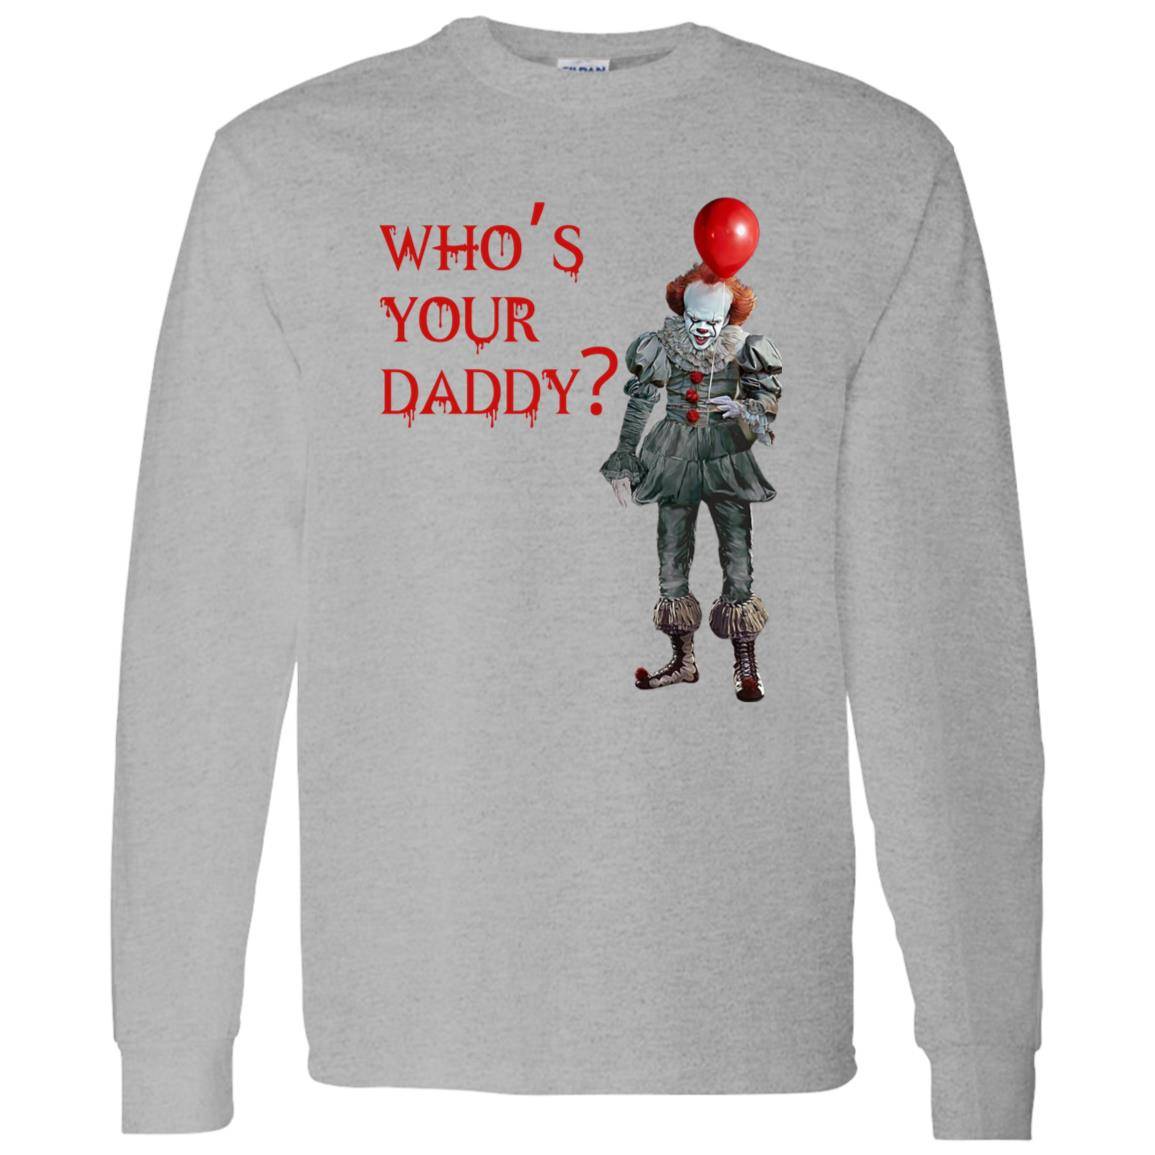 Sport gray unisex Halloween long sleeve t-shirt with an image of a sinister clown standing with a red balloon. The caption reads: Who's Your Daddy written in red, bloody letters. The clown is simulated to look like Pennywise the clown from the movie It.